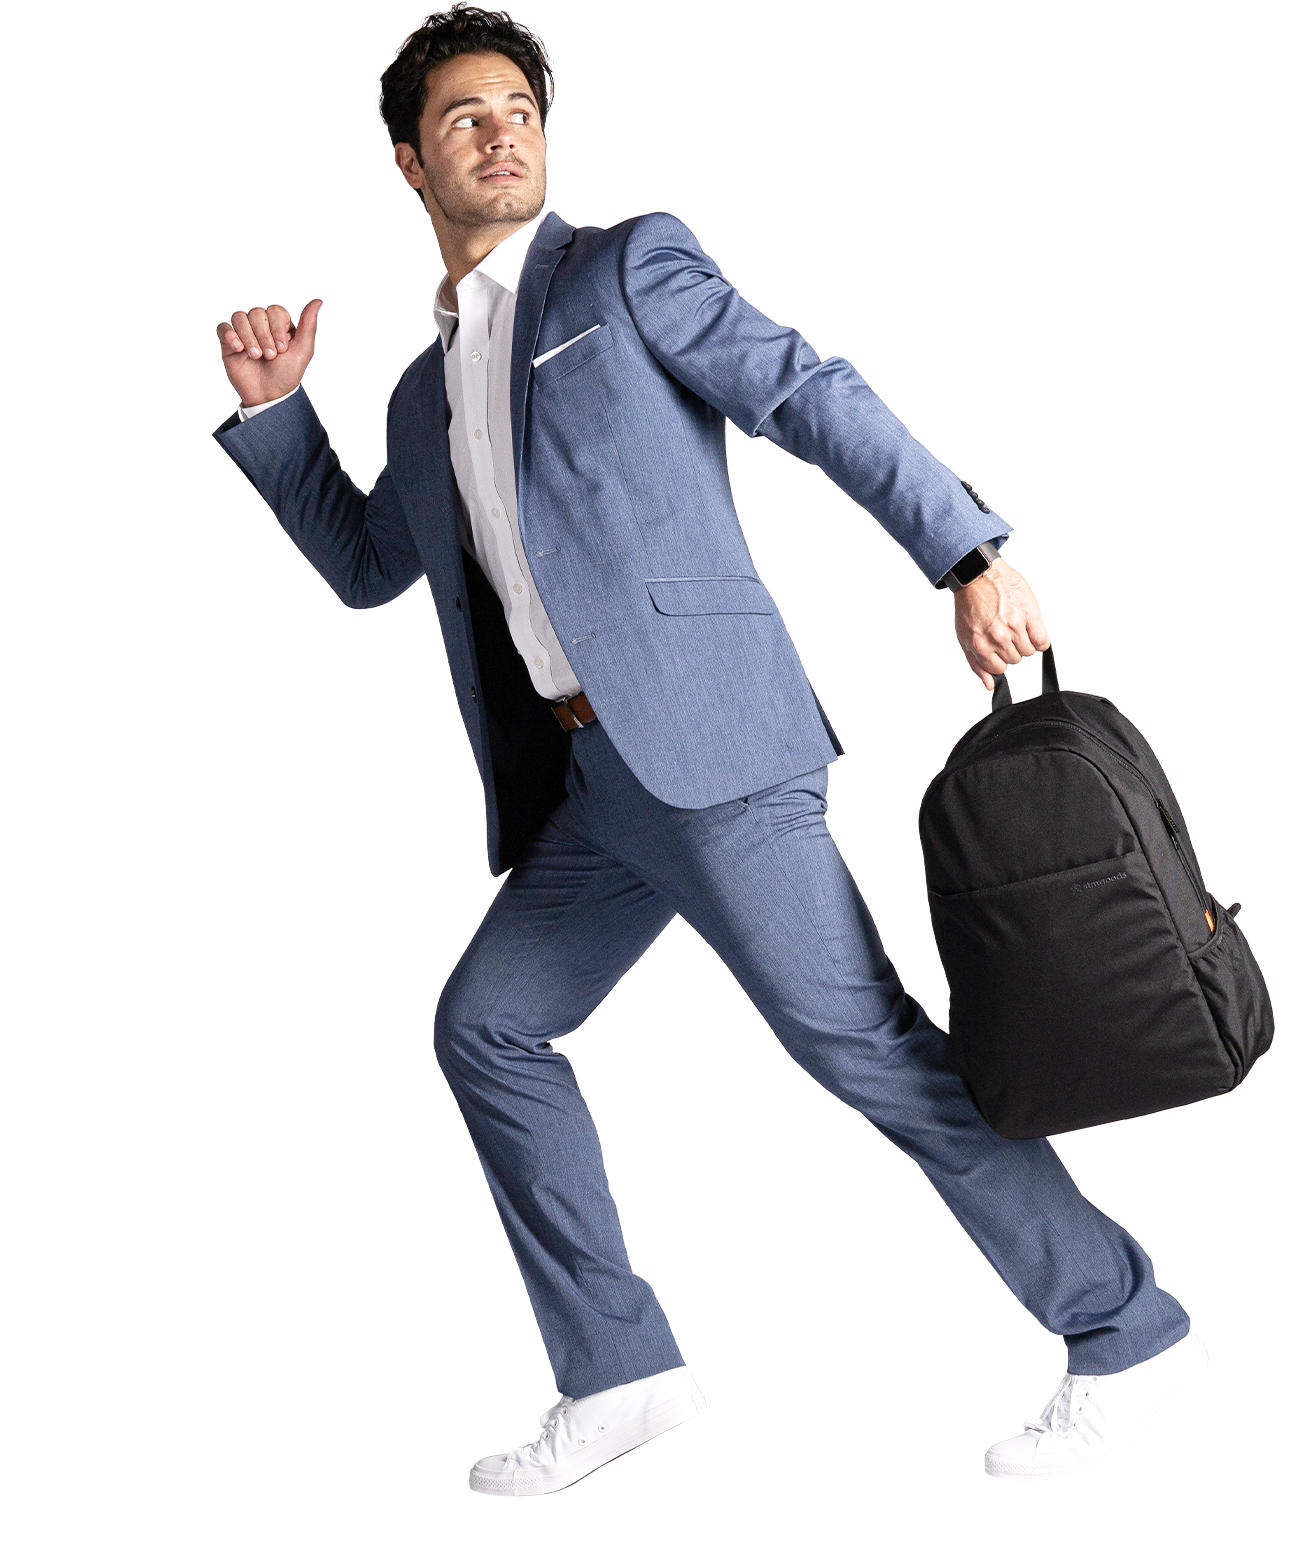 Man in suit, running, with backpack